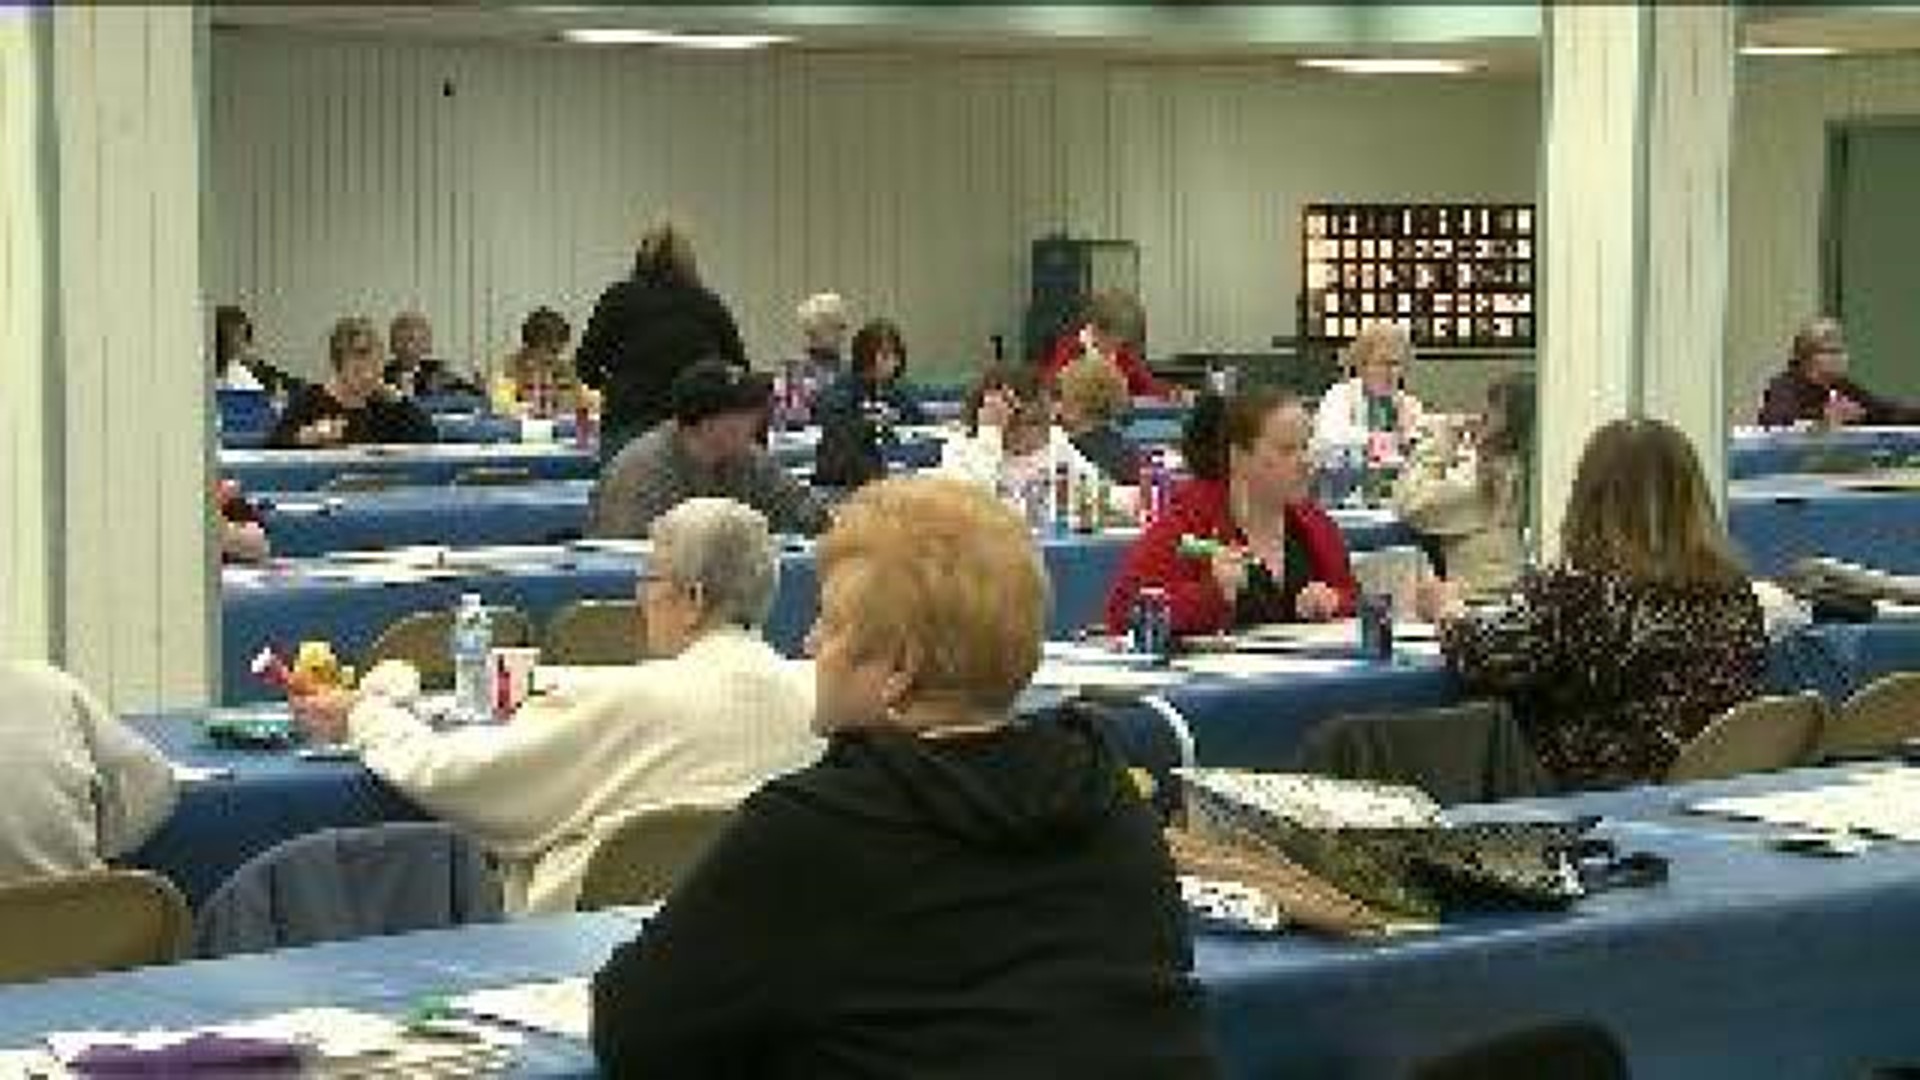 81-Year-Old Bingo Game Coming To An End